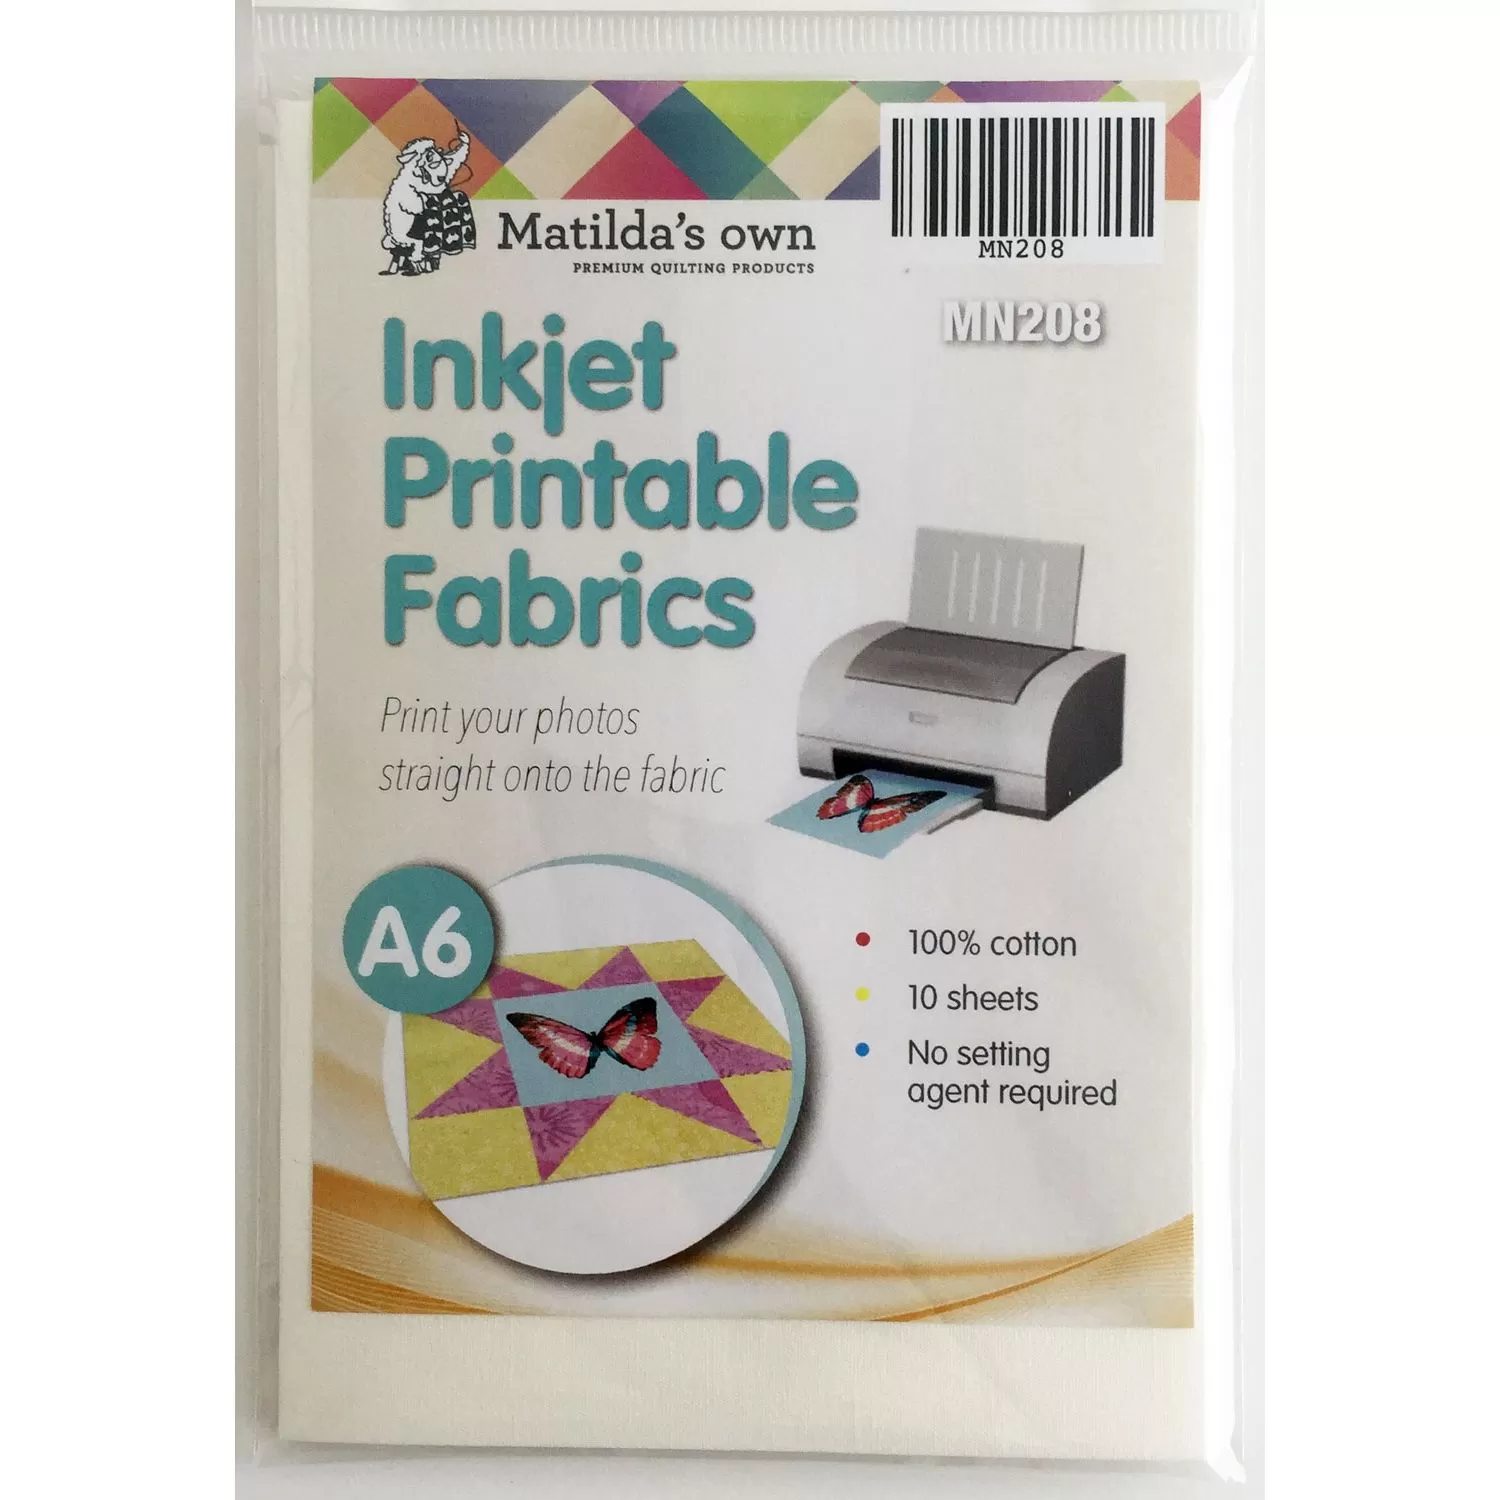 Inkjet Printable Fabric by Matilda's own 5 sheets A4 or 3 sheets A4 iron-on